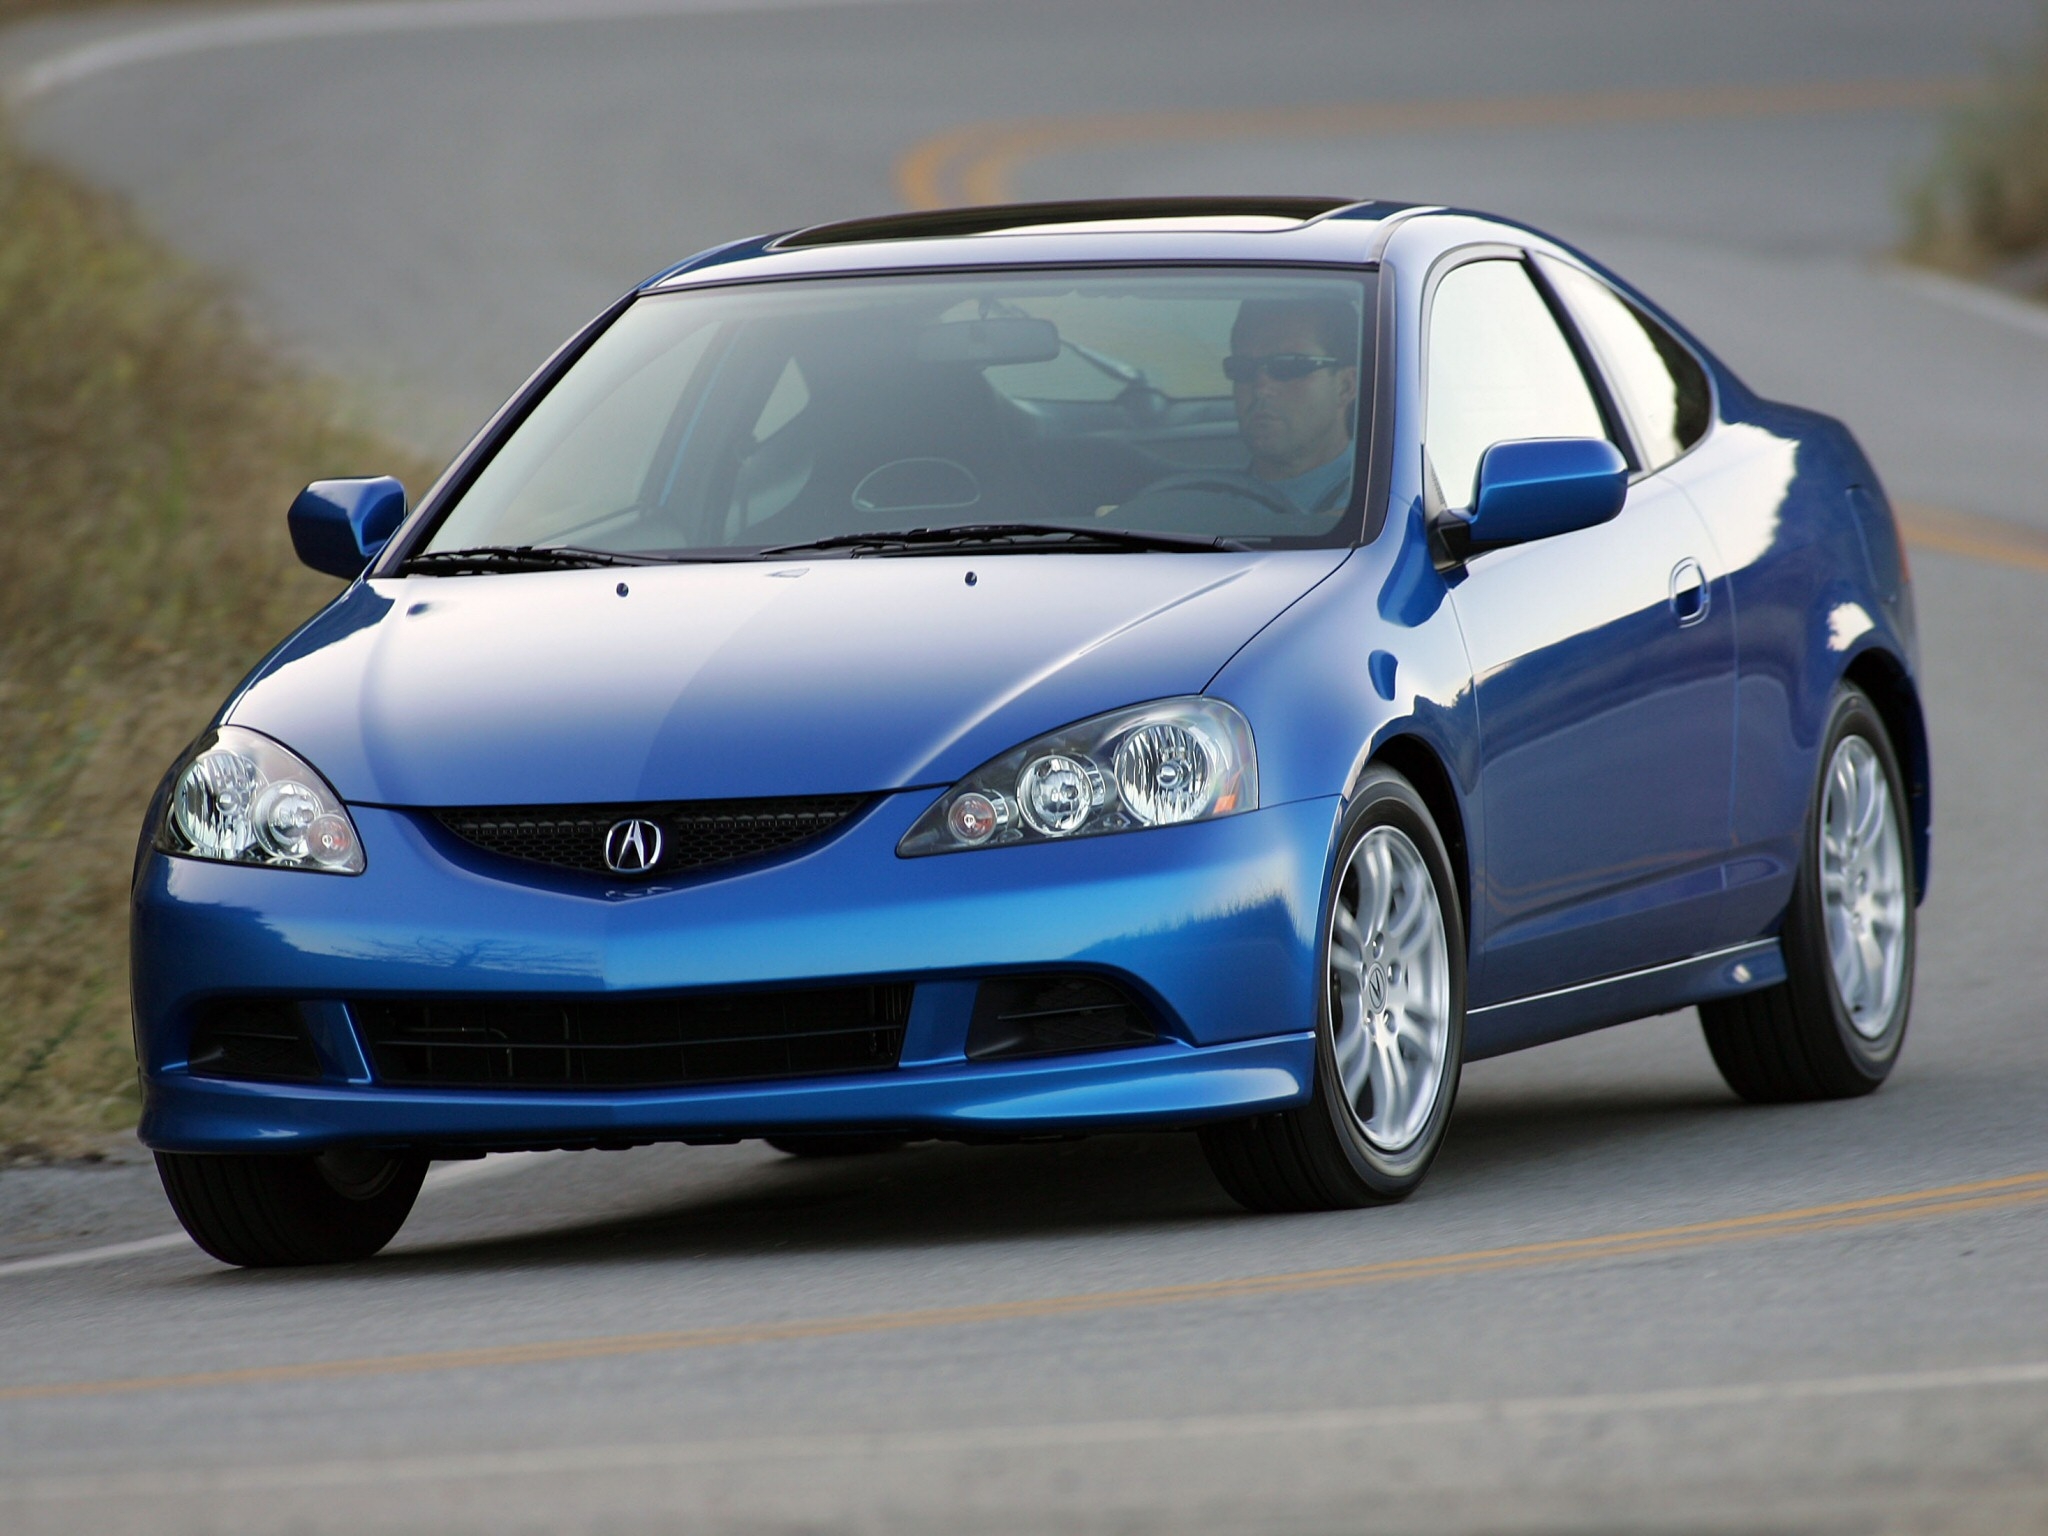 desktop Images auto, acura, cars, blue, road, front view, style, rsx, 2005, akura